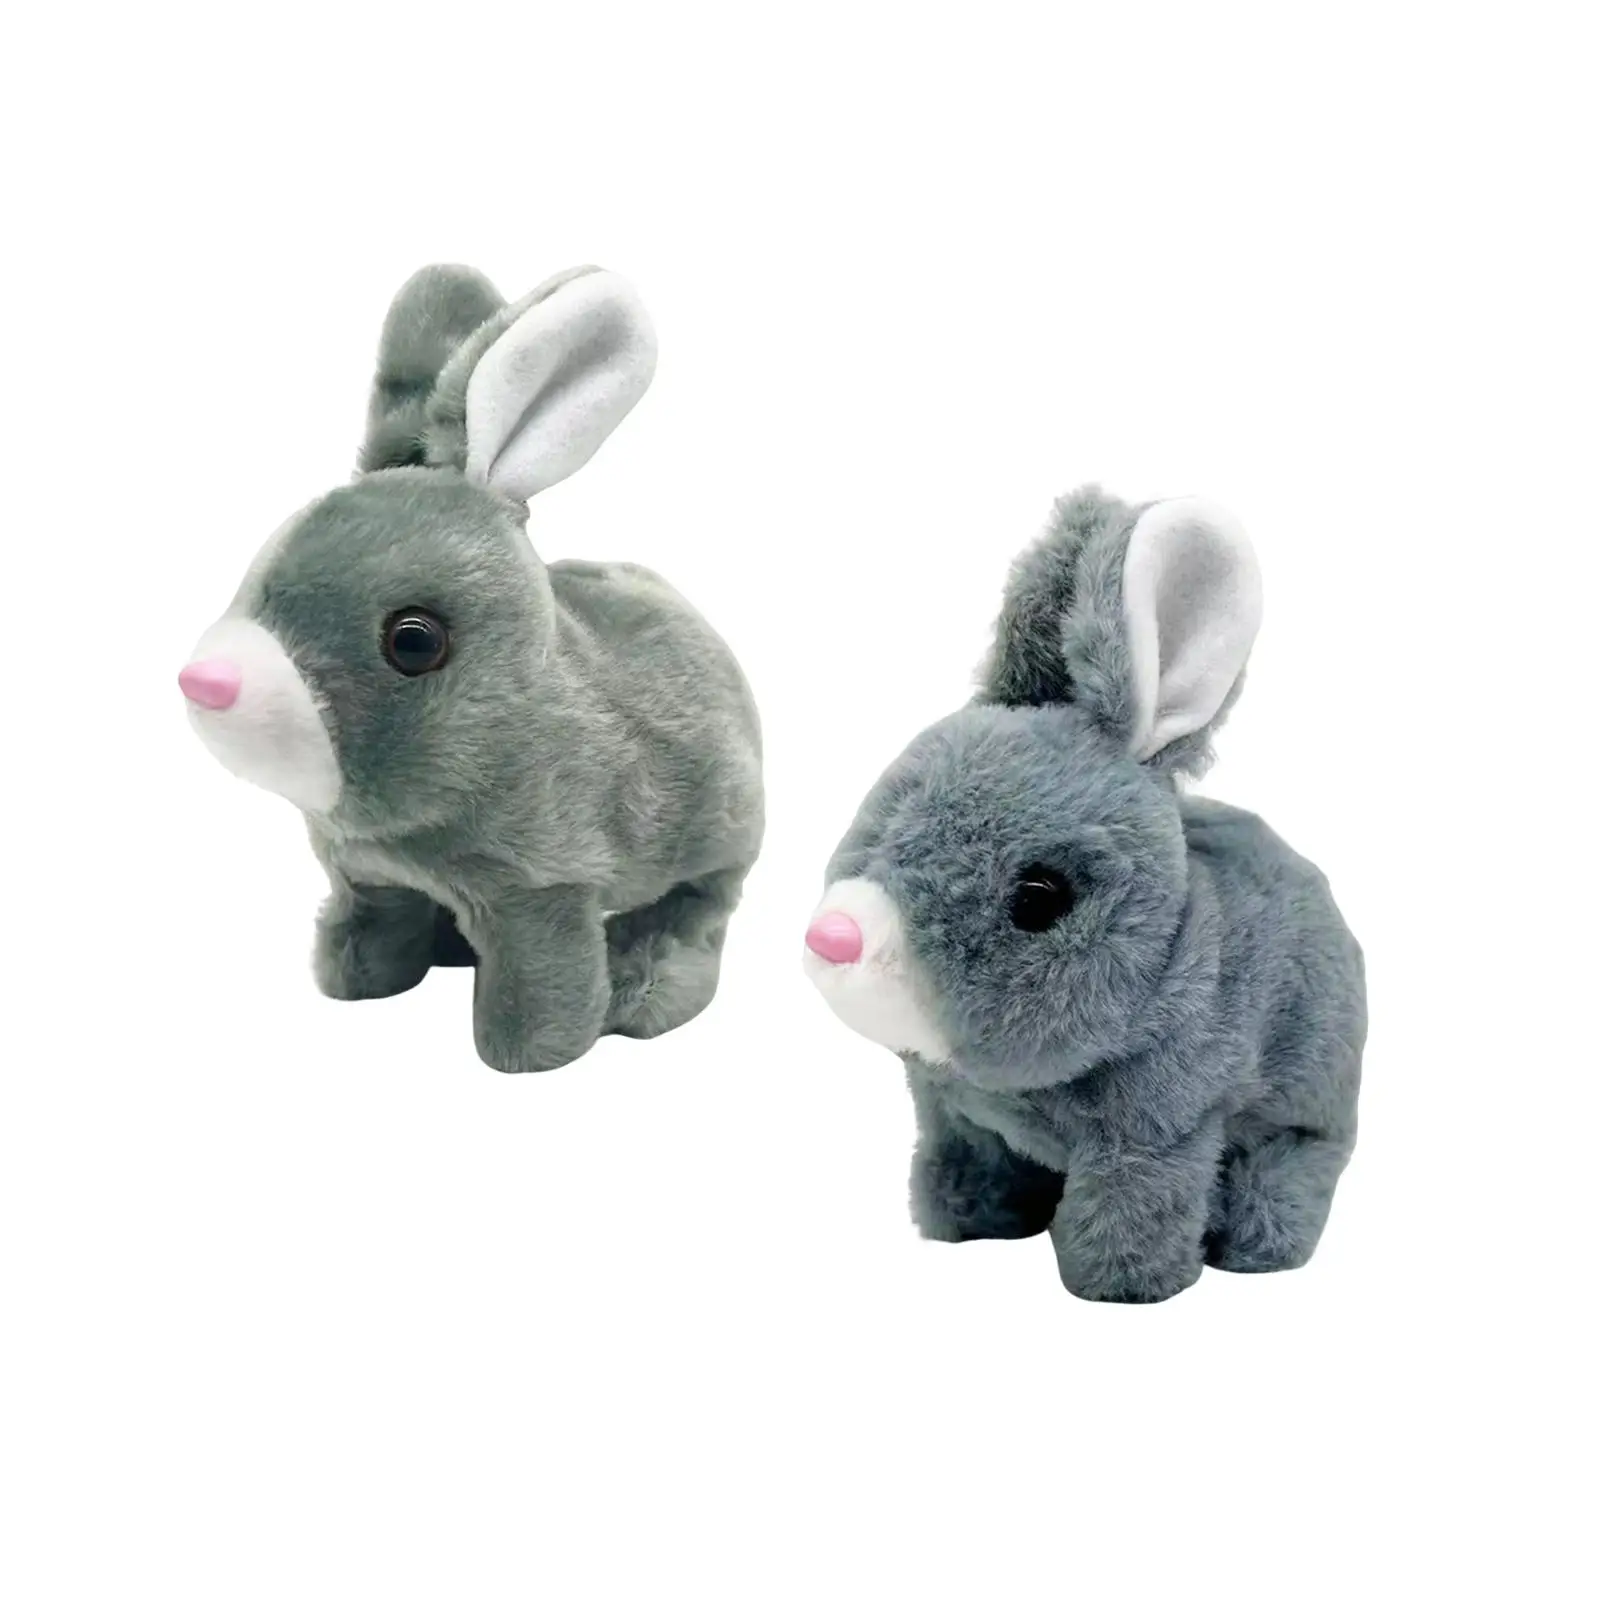 Electric Bunny Toys Adorable Easter Plush Toy for Bedtime Friend